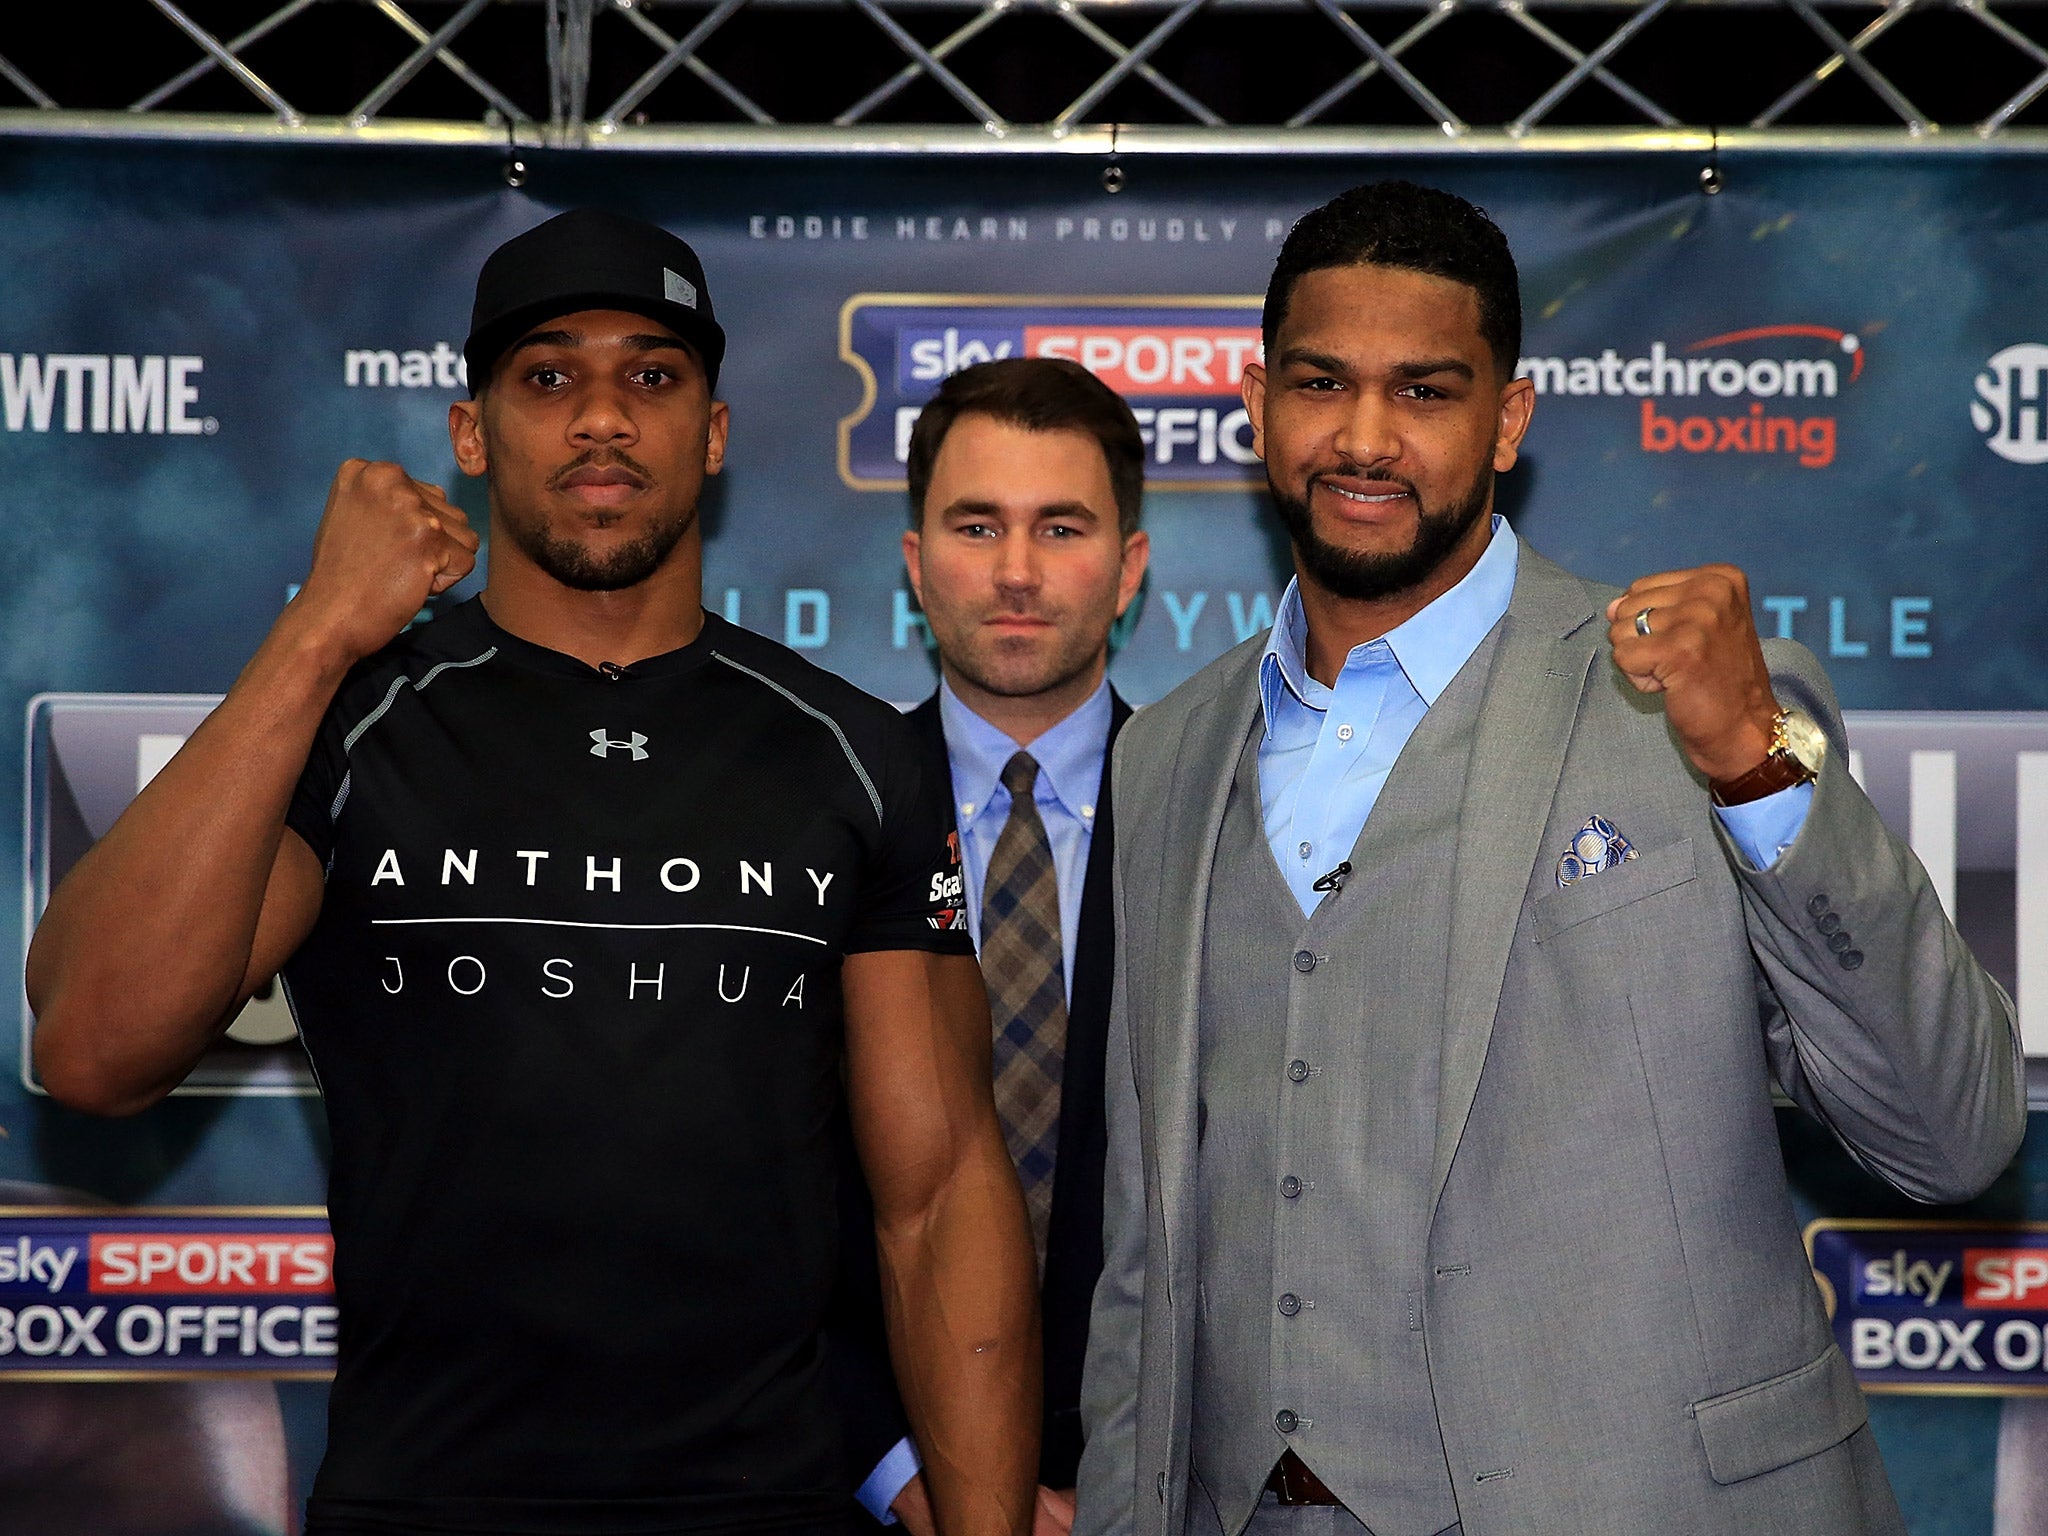 Anthony Joshua vs Dominic Breazeale What time does it start, what channel is it on, odds and where can I watch it? The Independent The Independent